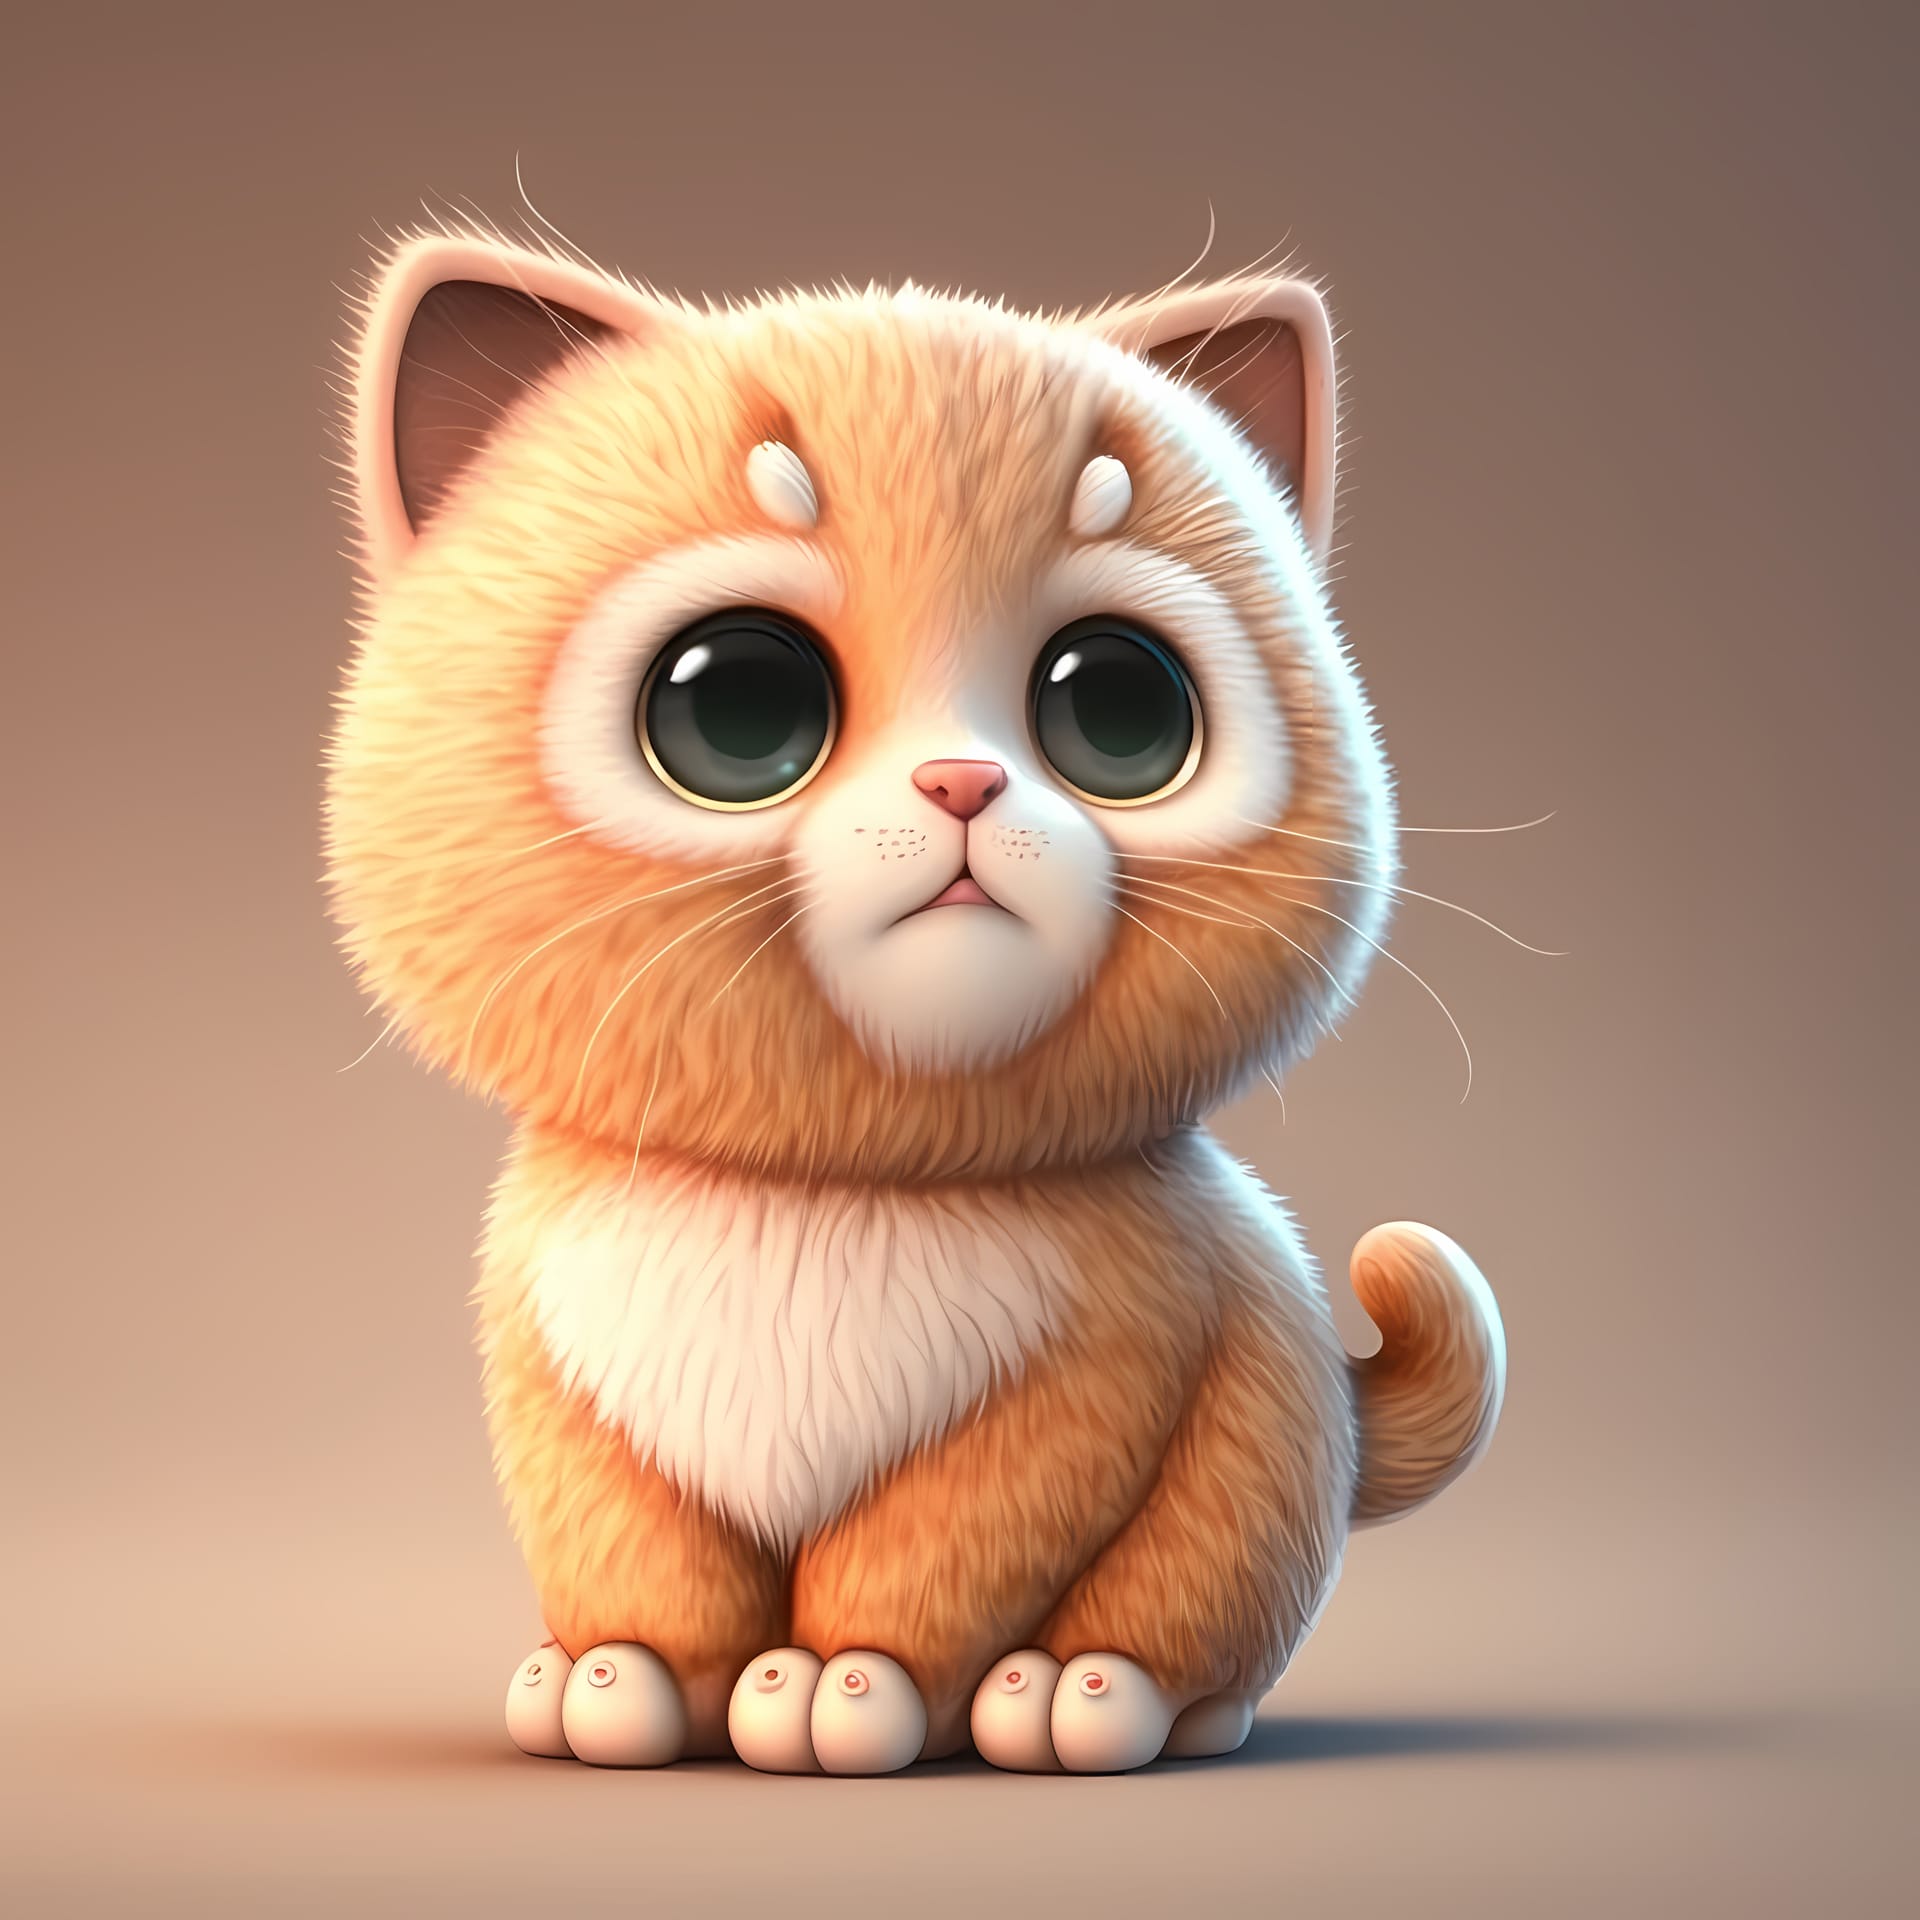 Adorable cute chubby cat 3d render bright image